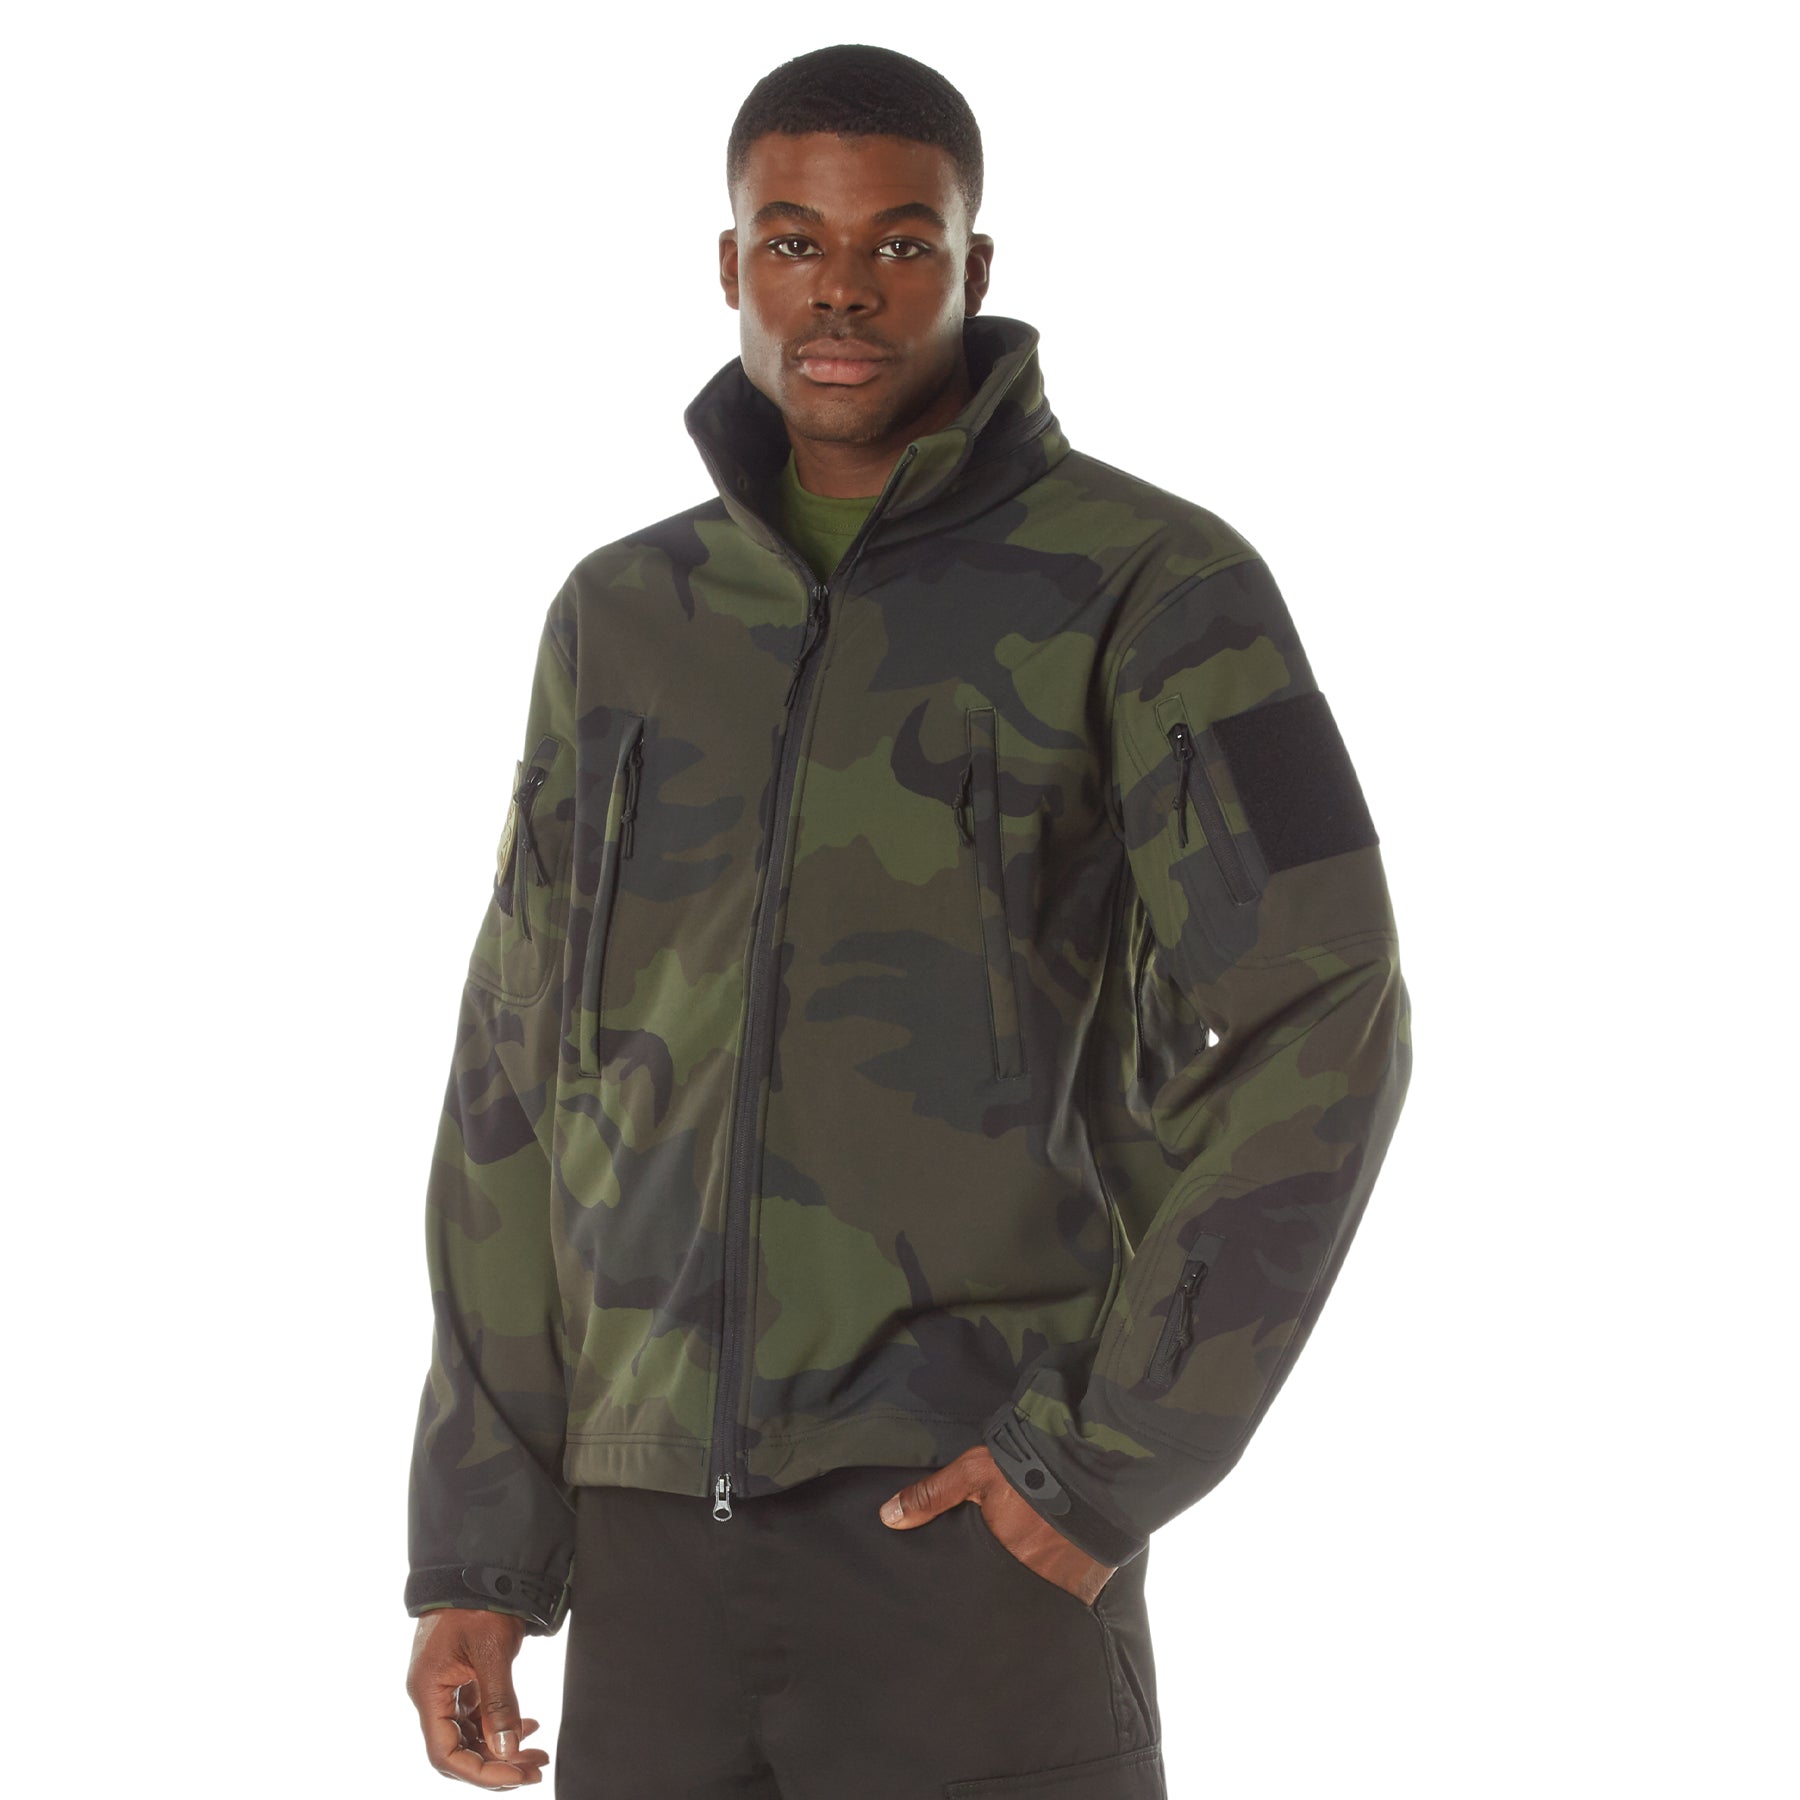 Poly Camo Spec Ops Tactical Soft Shell Jackets Midnight Woodland Camo